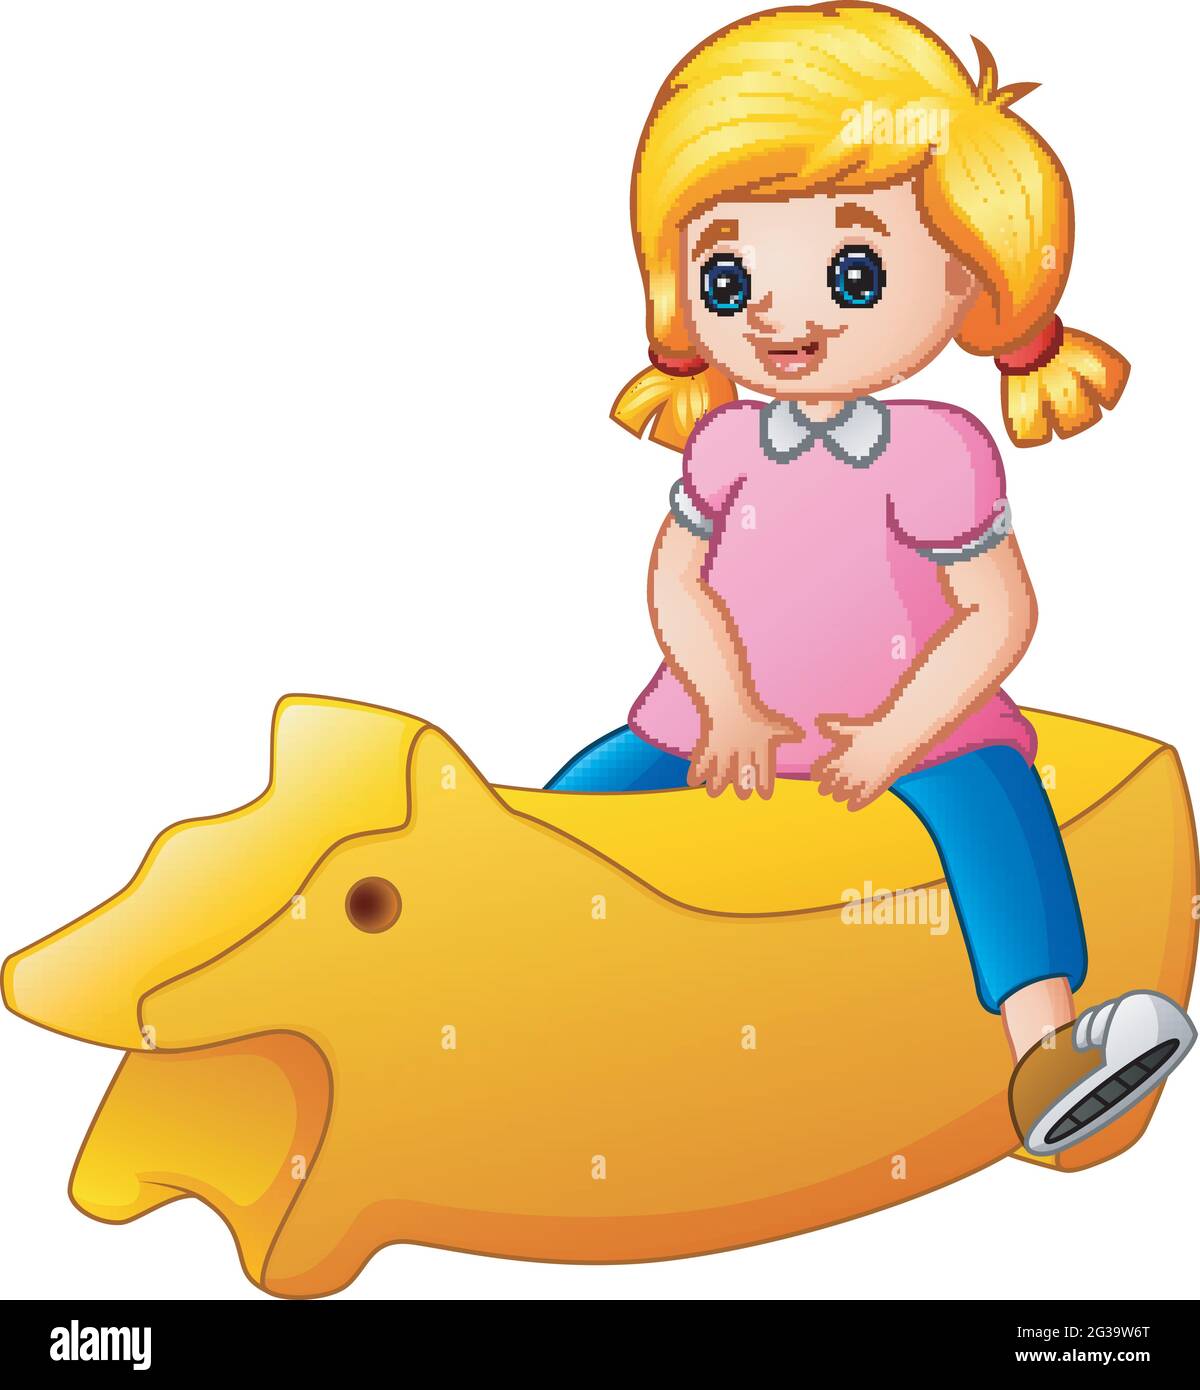 Little girl riding a yellow toy isolated on white background Stock Vector